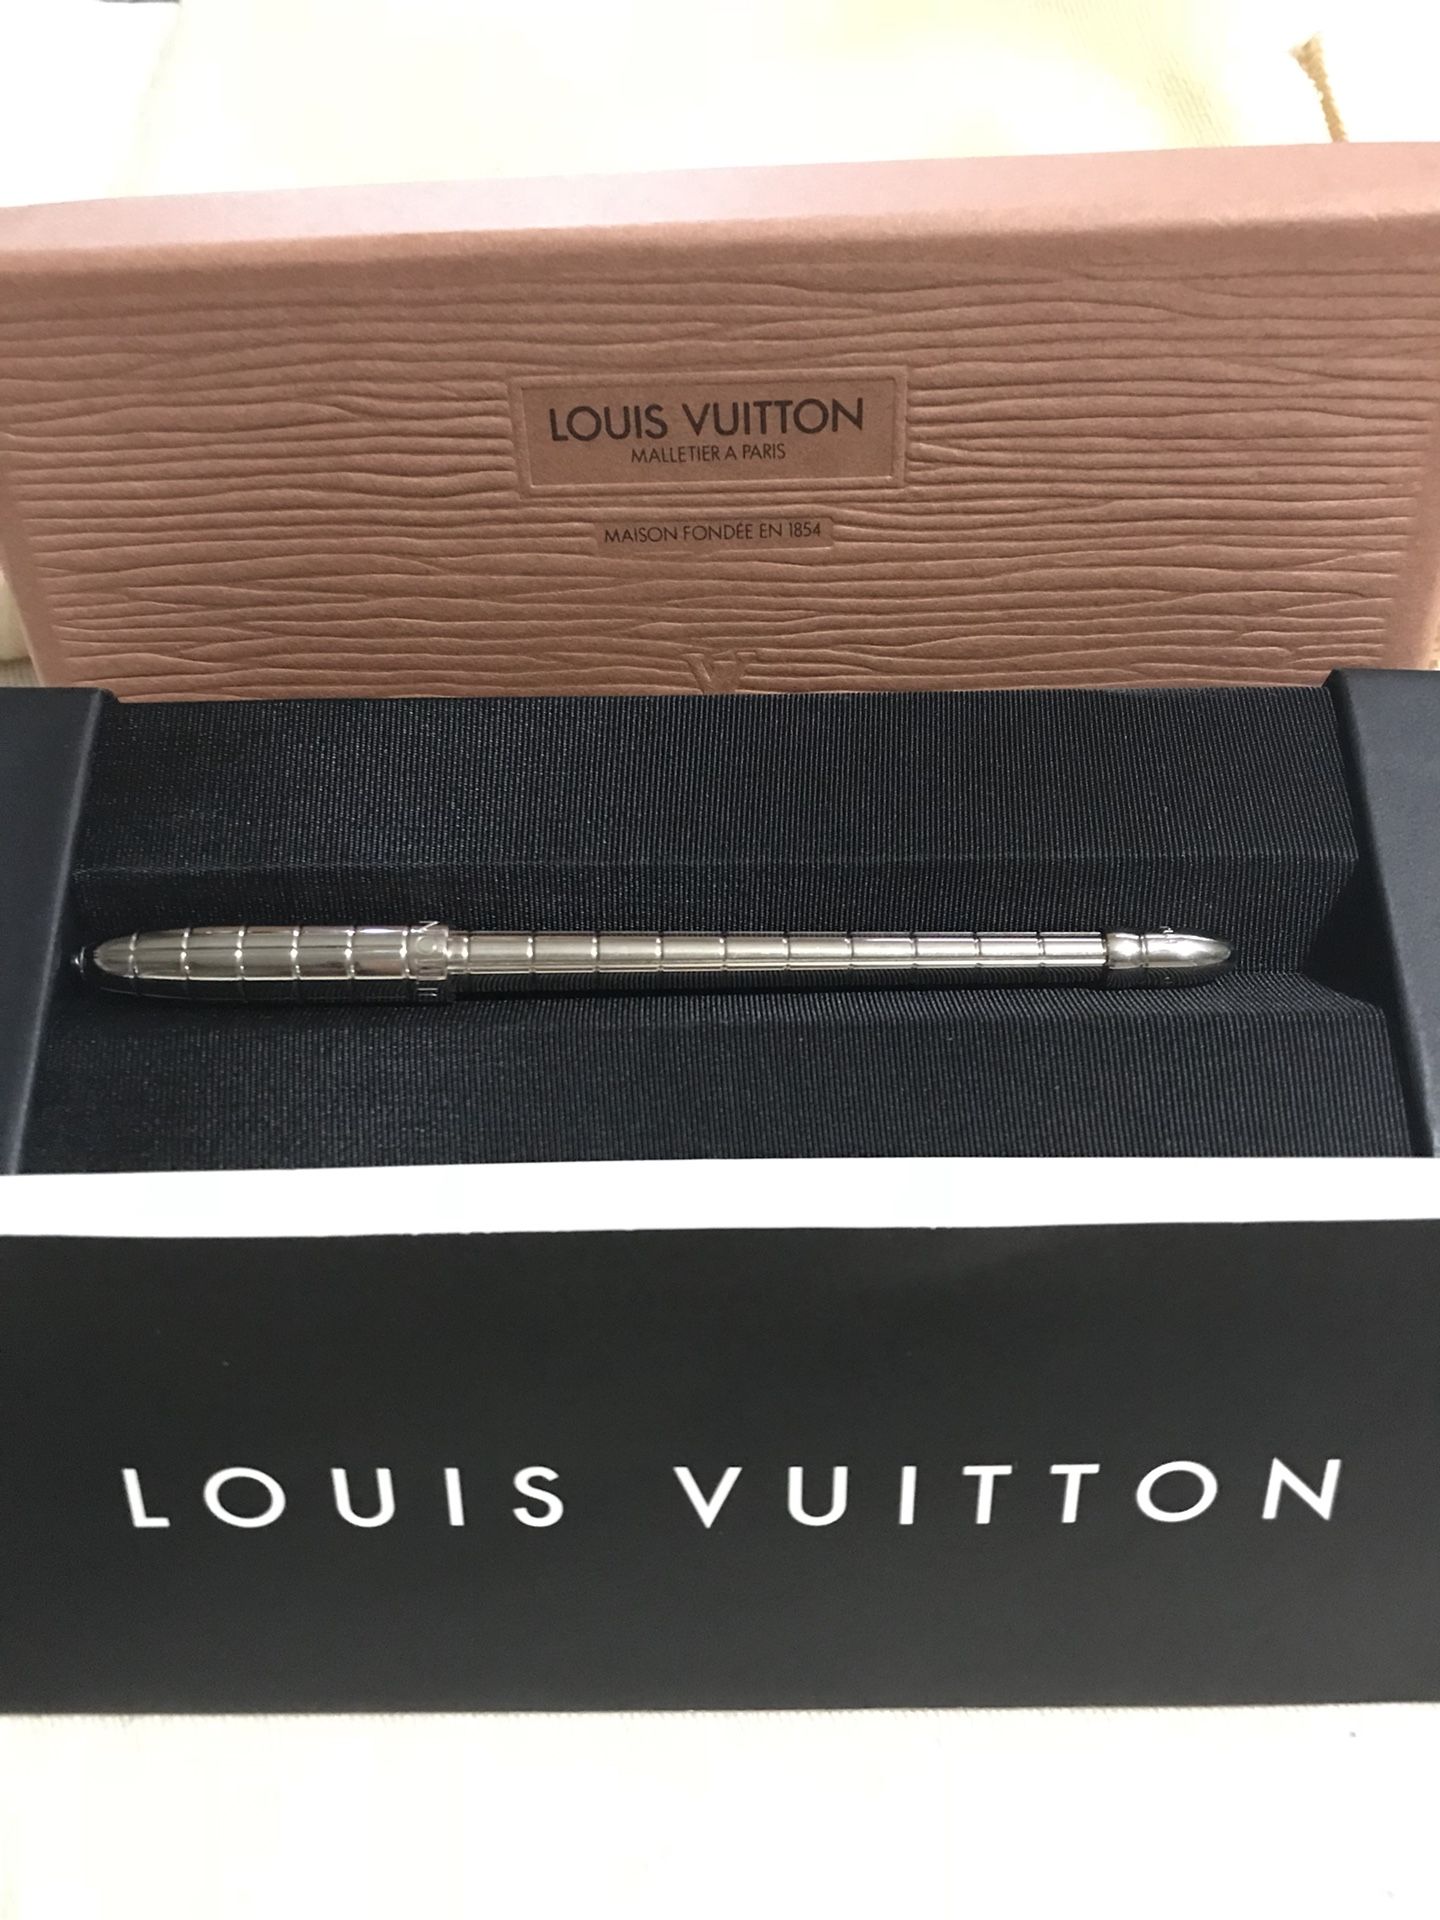 Louis Vuitton Pen. for Sale in Humble, TX - OfferUp